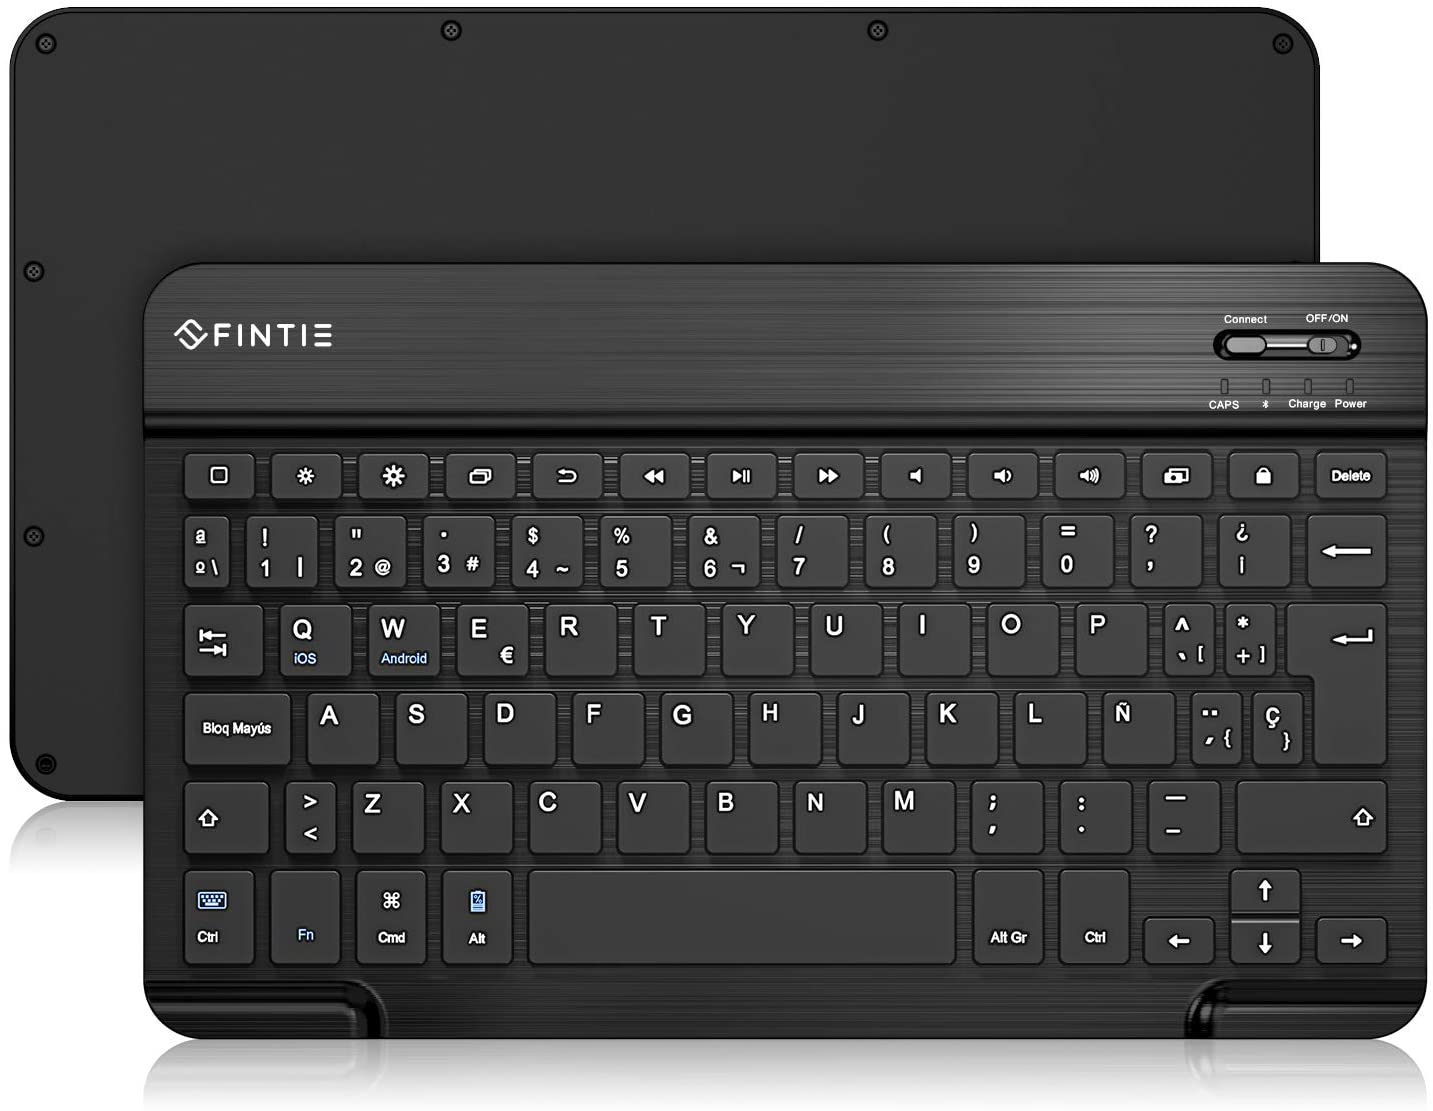 https://www.droiders.com/wp-content/uploads/2021/12/Teclado-Fintie-para-tablet-Android-Lenovo.jpg